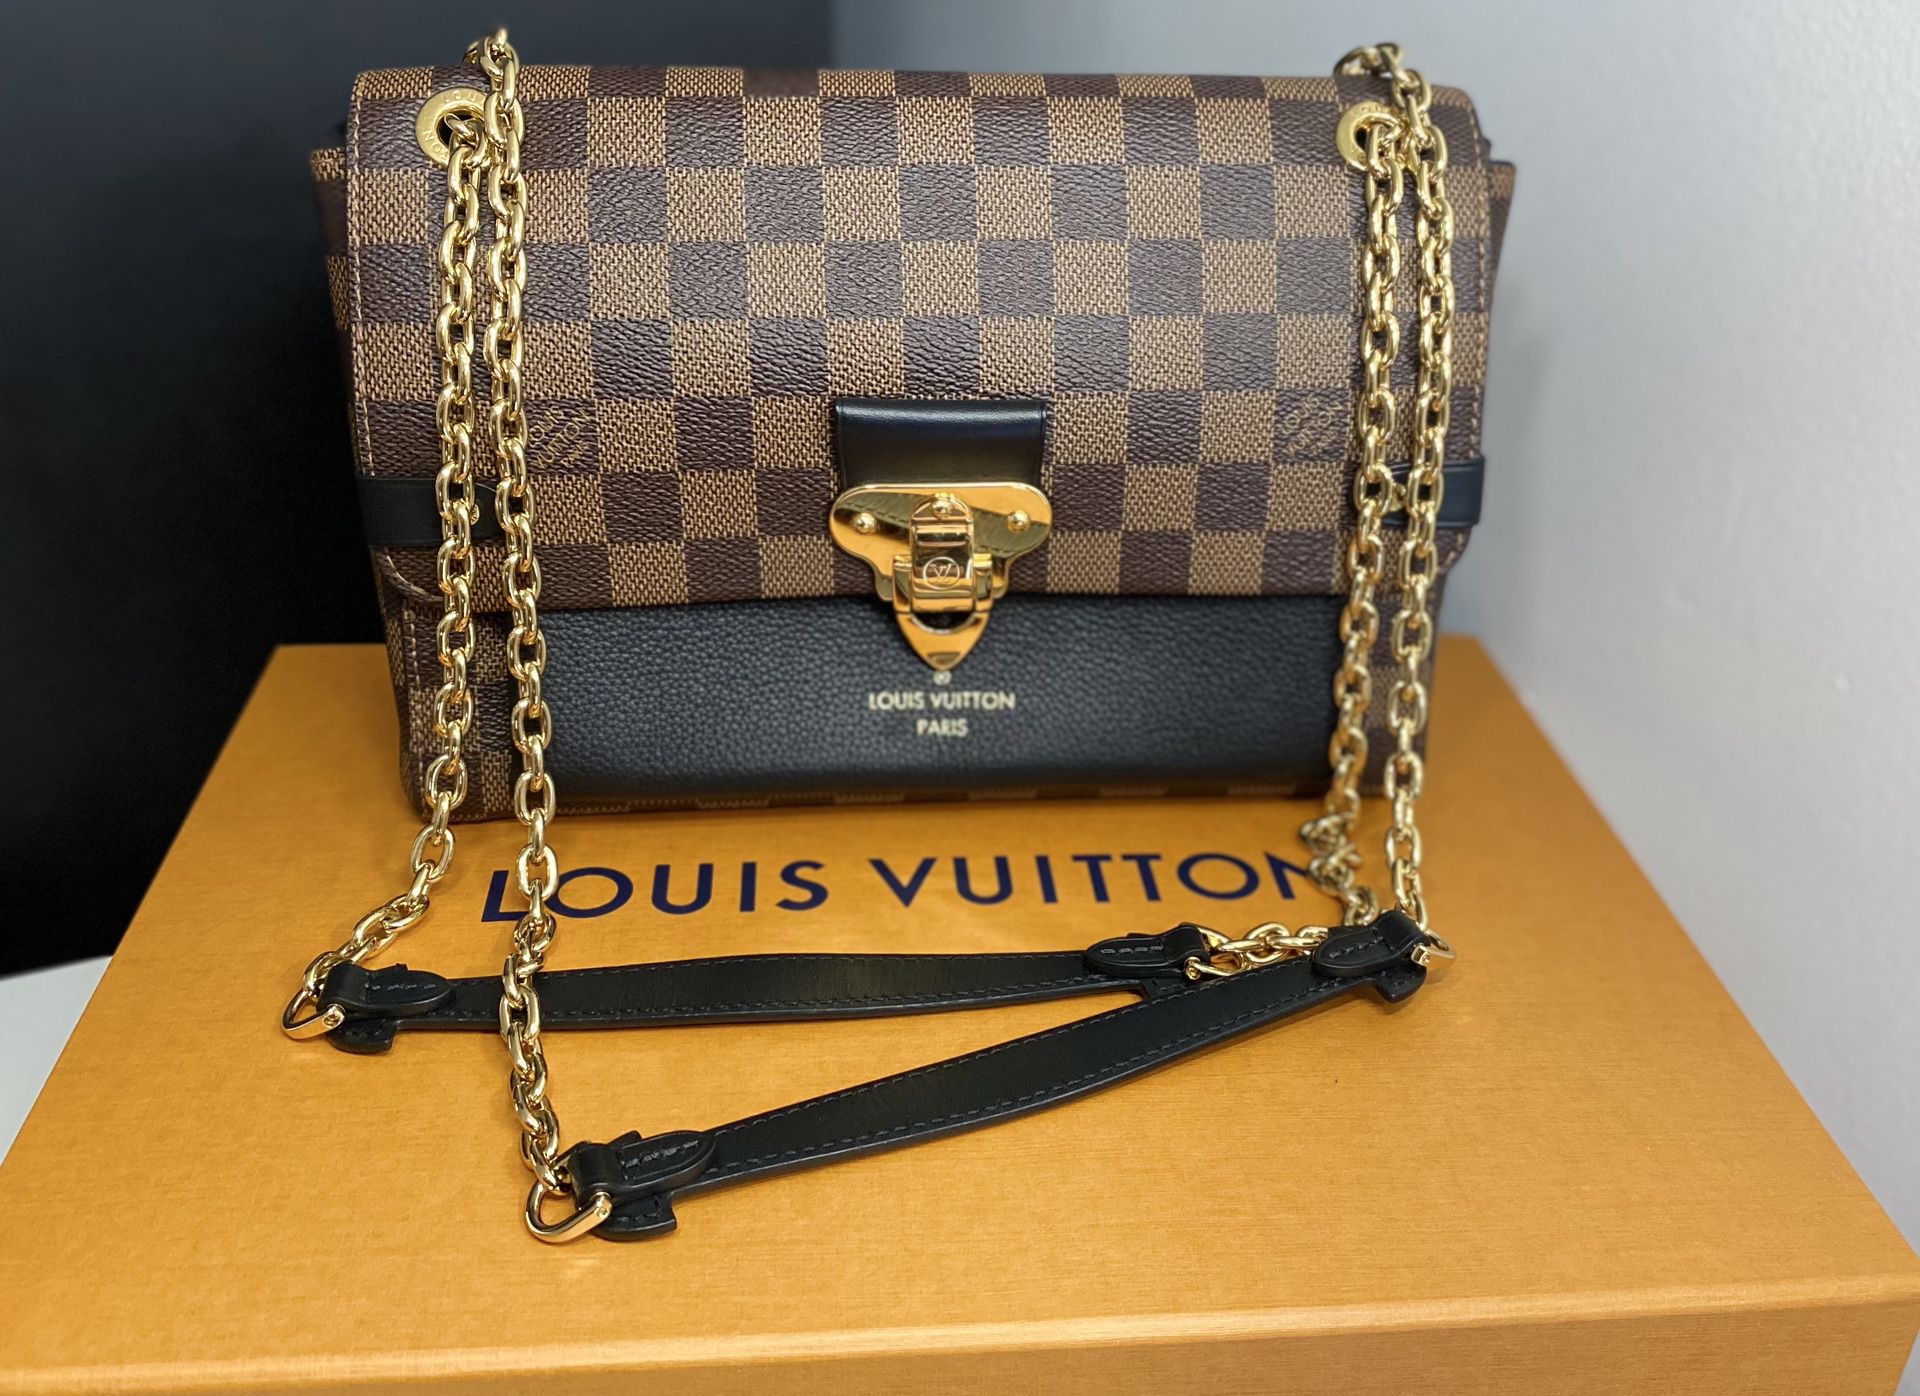 Louis Vuitton Mini Dauphine Bags for Sale in Sterling, VA - OfferUp